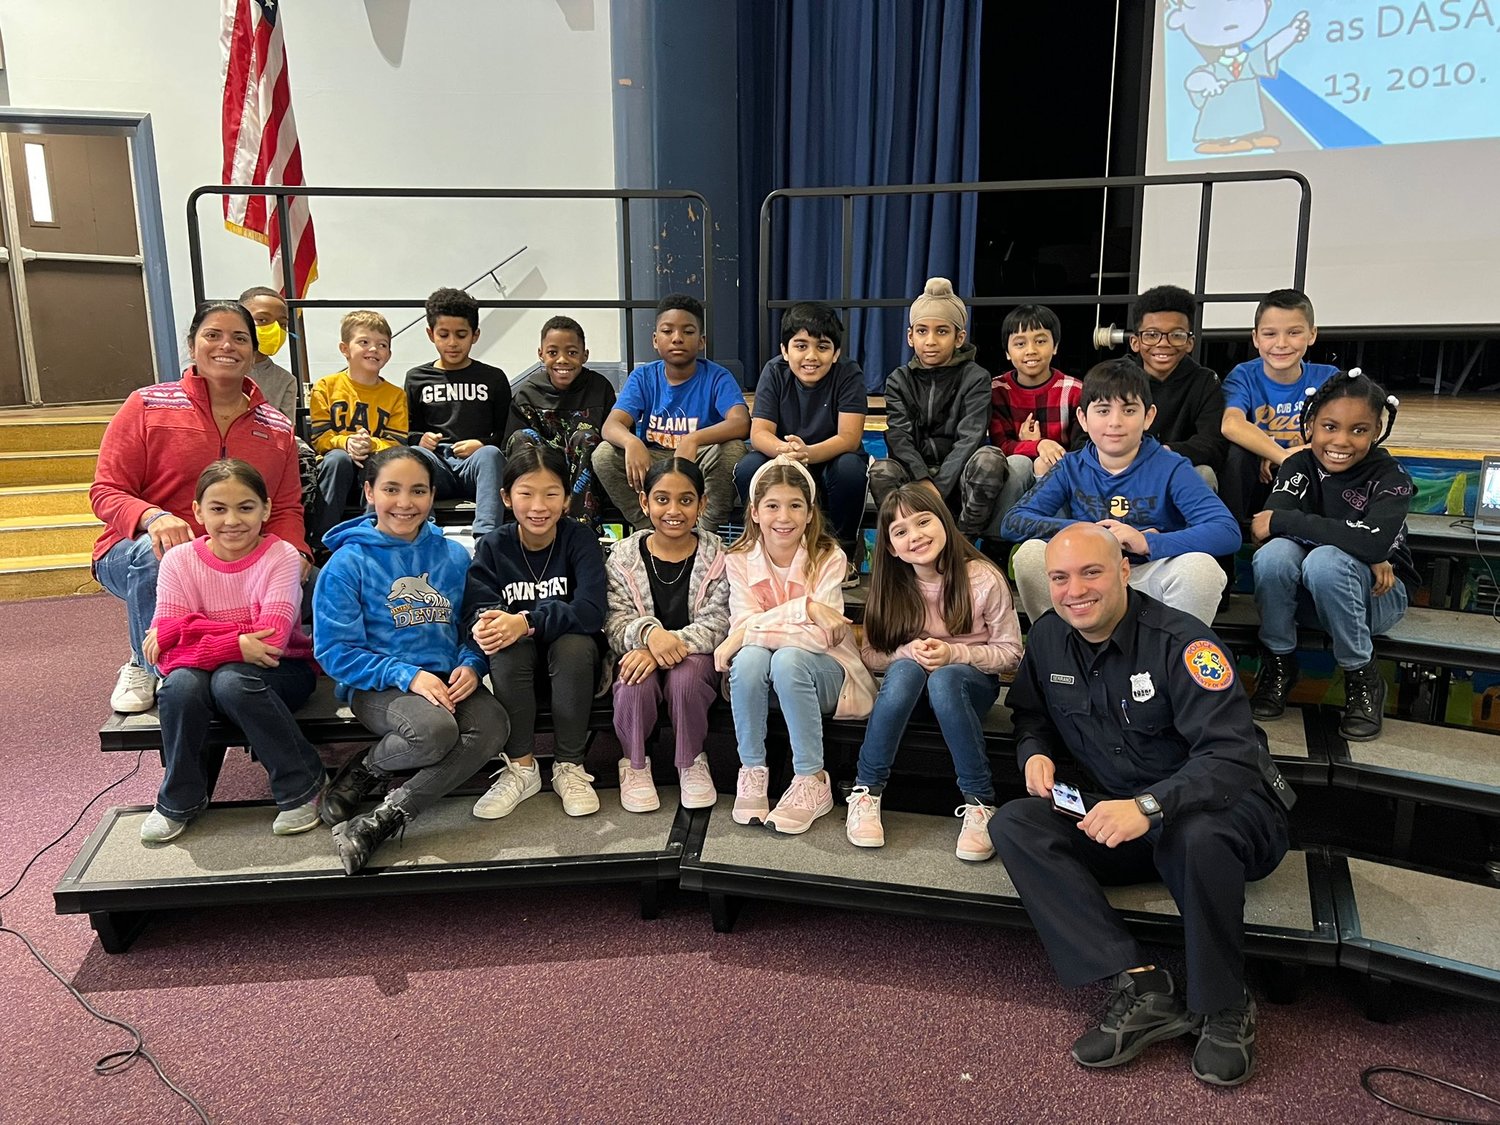 Officer Luis Serrano from the Nassau County Police Department delivered an anti-bullying presentation.